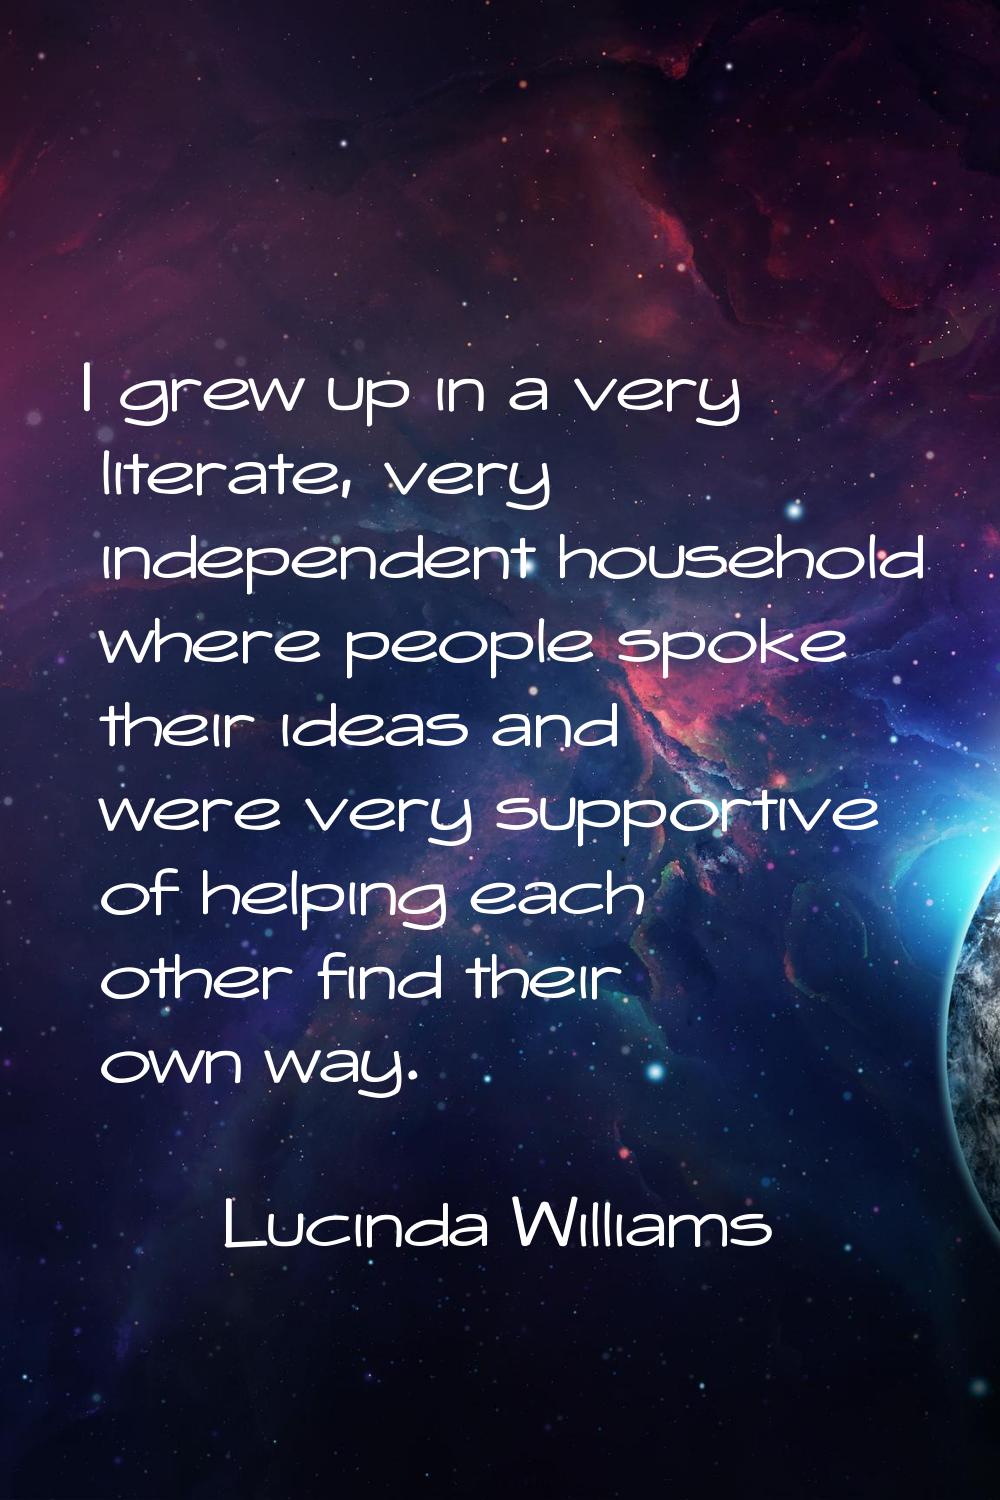 I grew up in a very literate, very independent household where people spoke their ideas and were ve